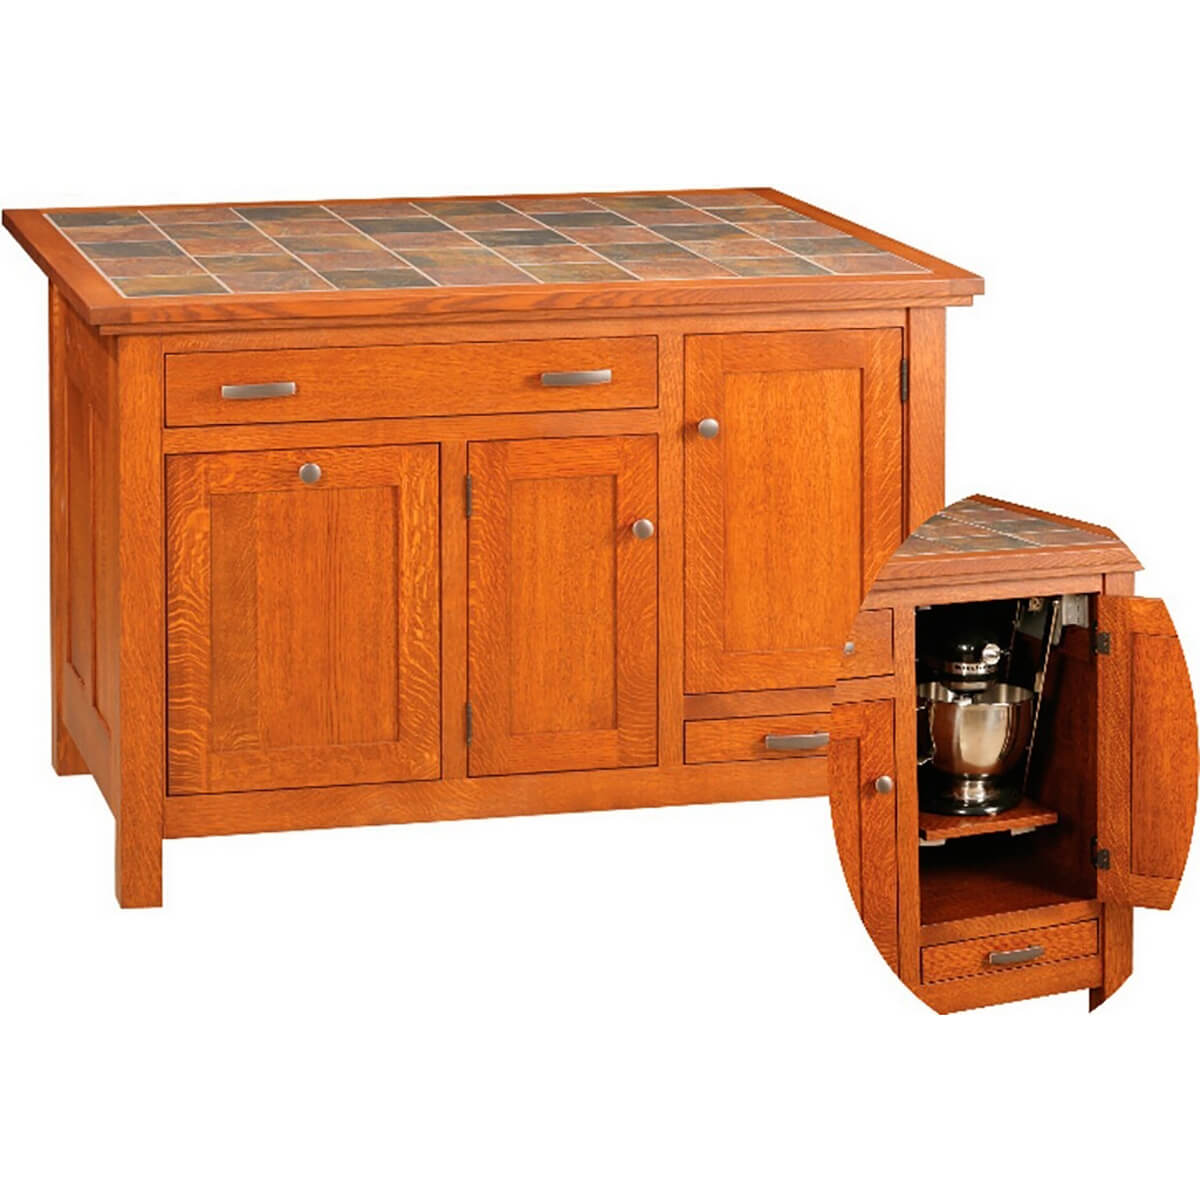 Read more about the article Brookline Mission Kitchen Island Cabinet with Mixer Lift